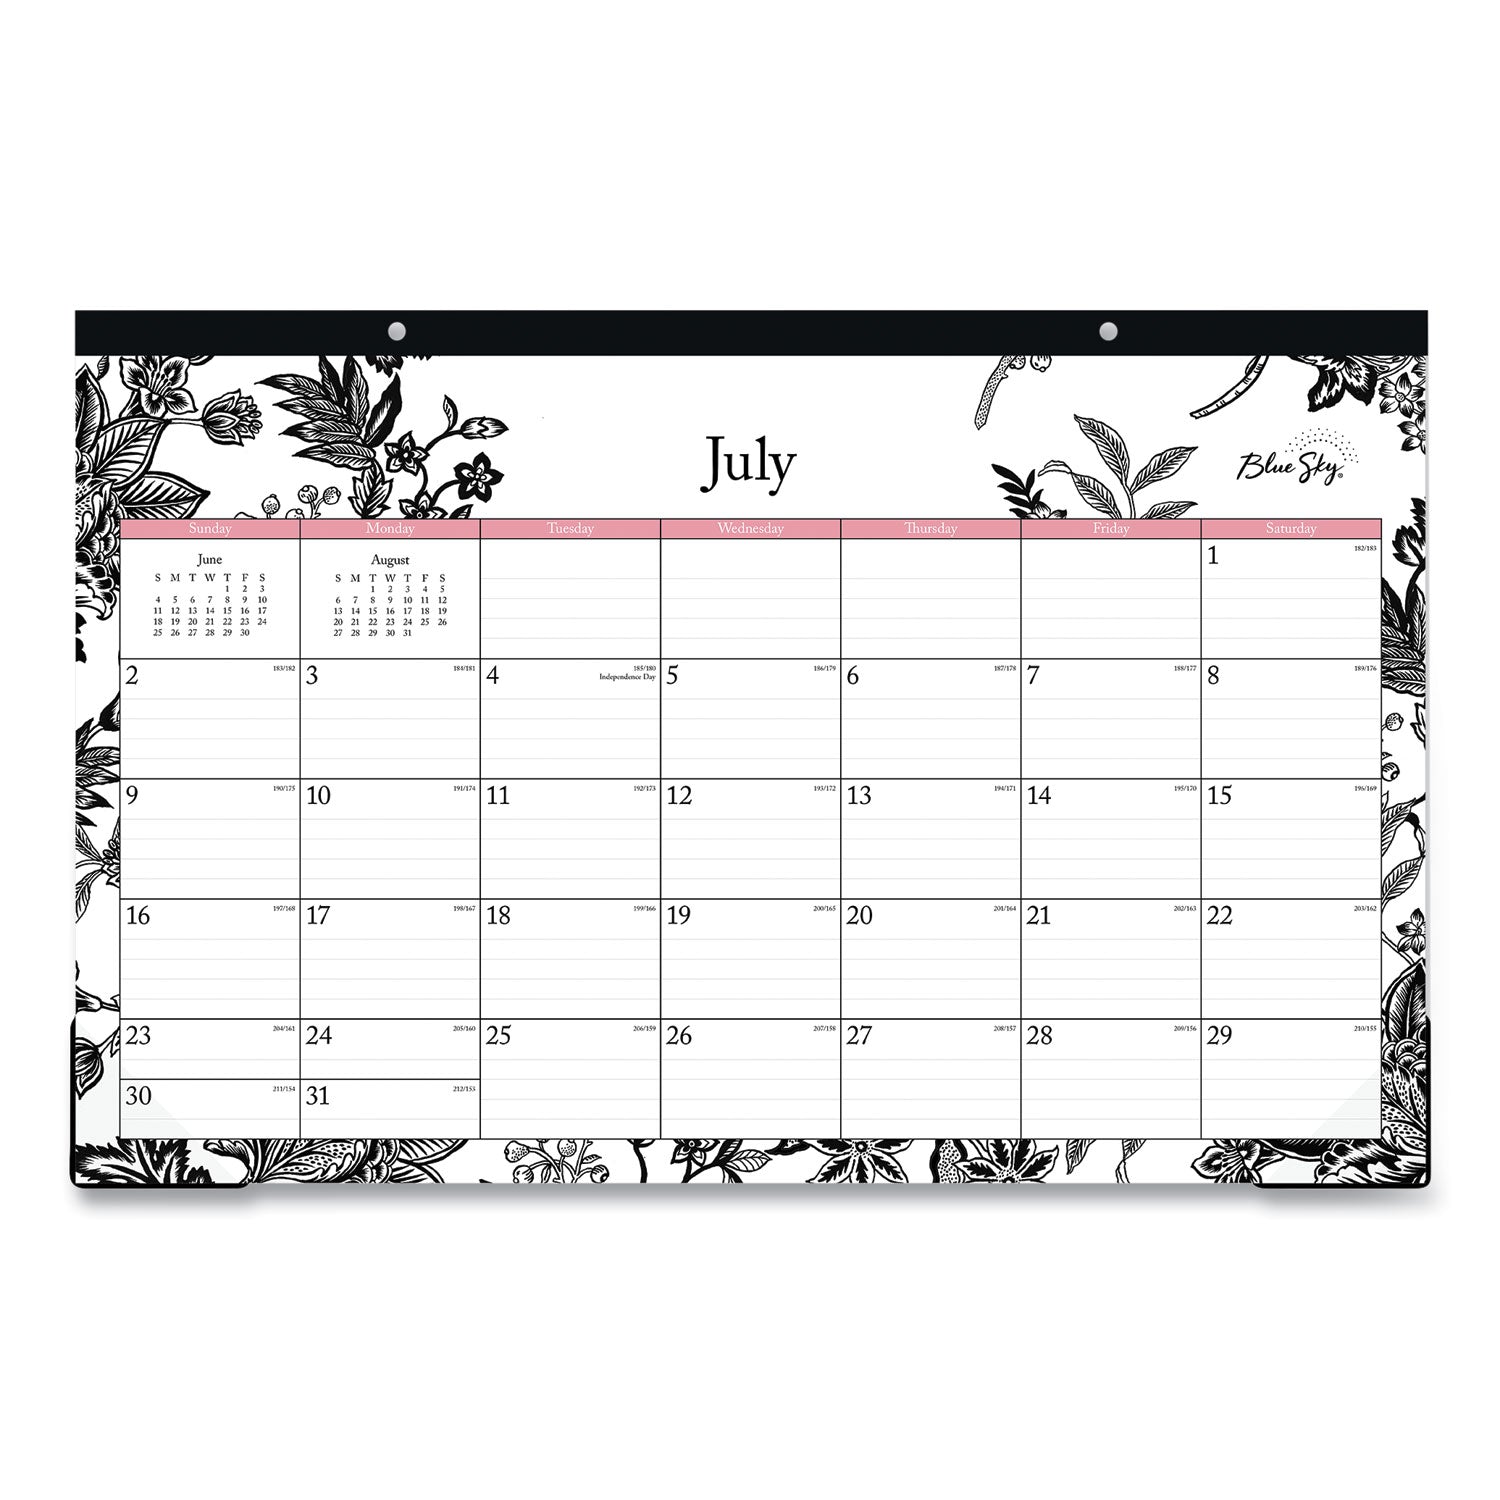 analeis-academic-year-desk-pad-calendar-floral-artwork-17-x-11-white-black-pink-sheets-12-month-july-to-june-2023-2024_bls130617 - 1